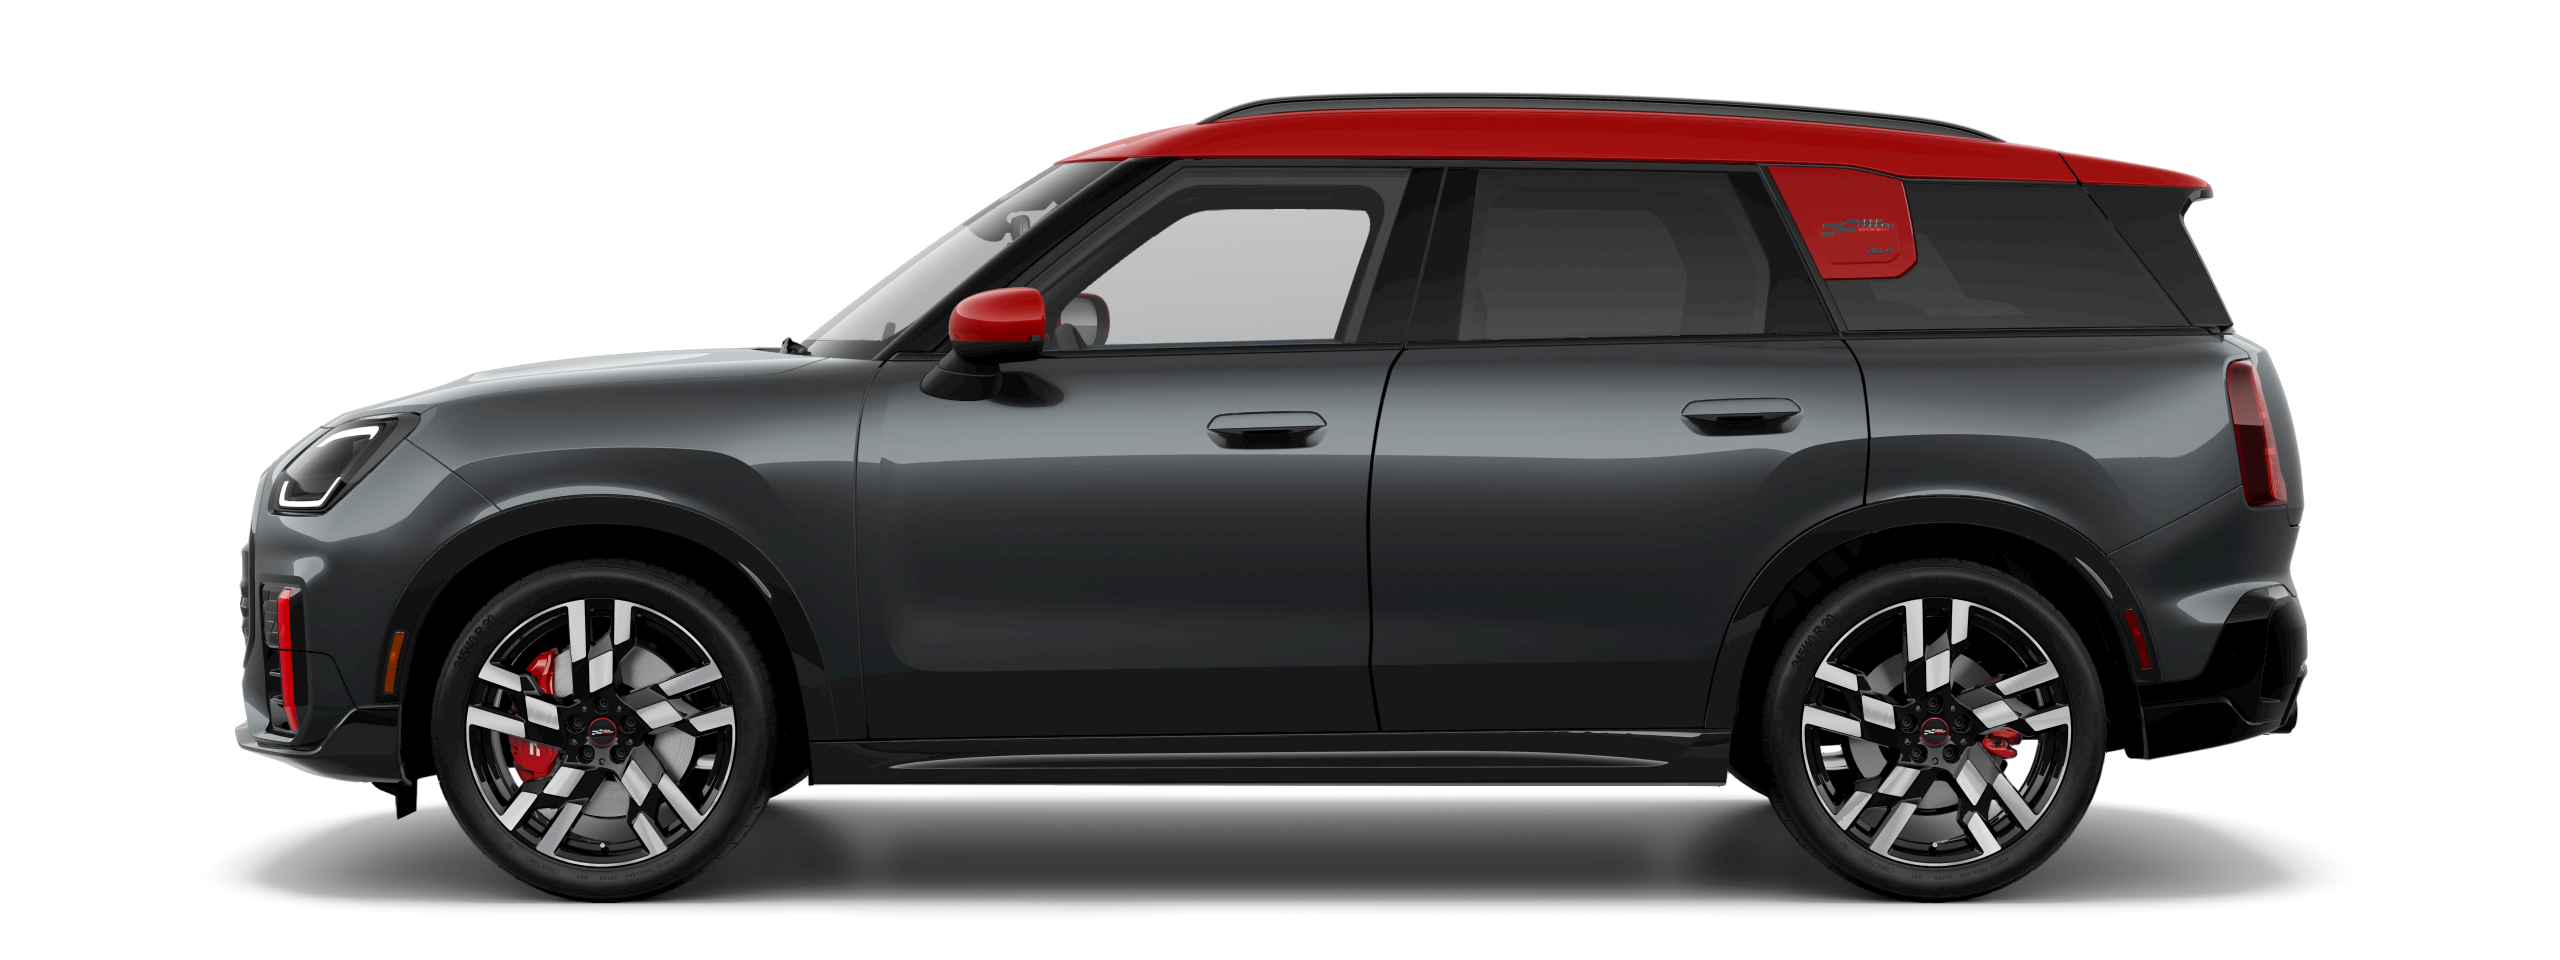 Side view of a 2025 MINI JCW Countryman ALL4 in the Legend Grey body color, facing left with its shadow underneath it.